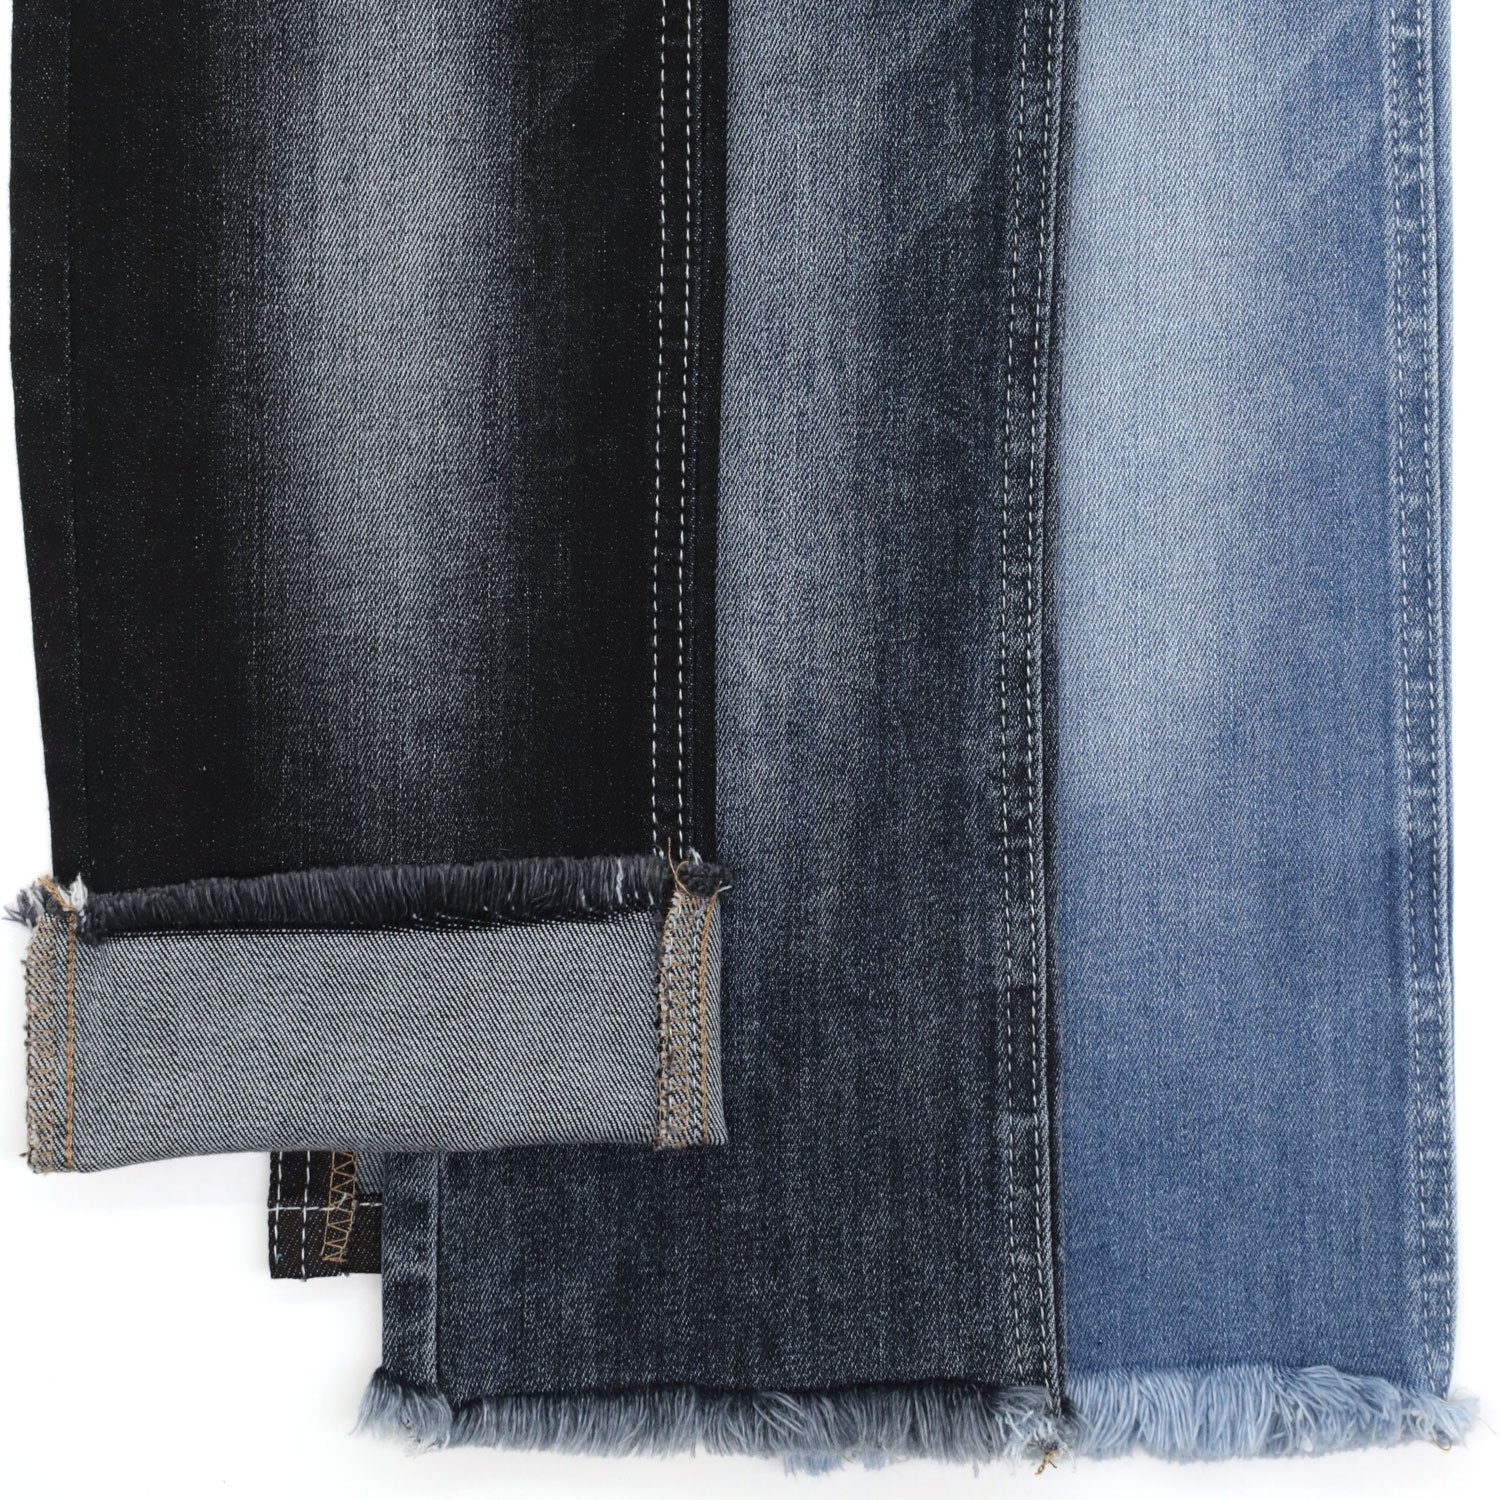 Top Tips for High Stretch Denim Fabric 1